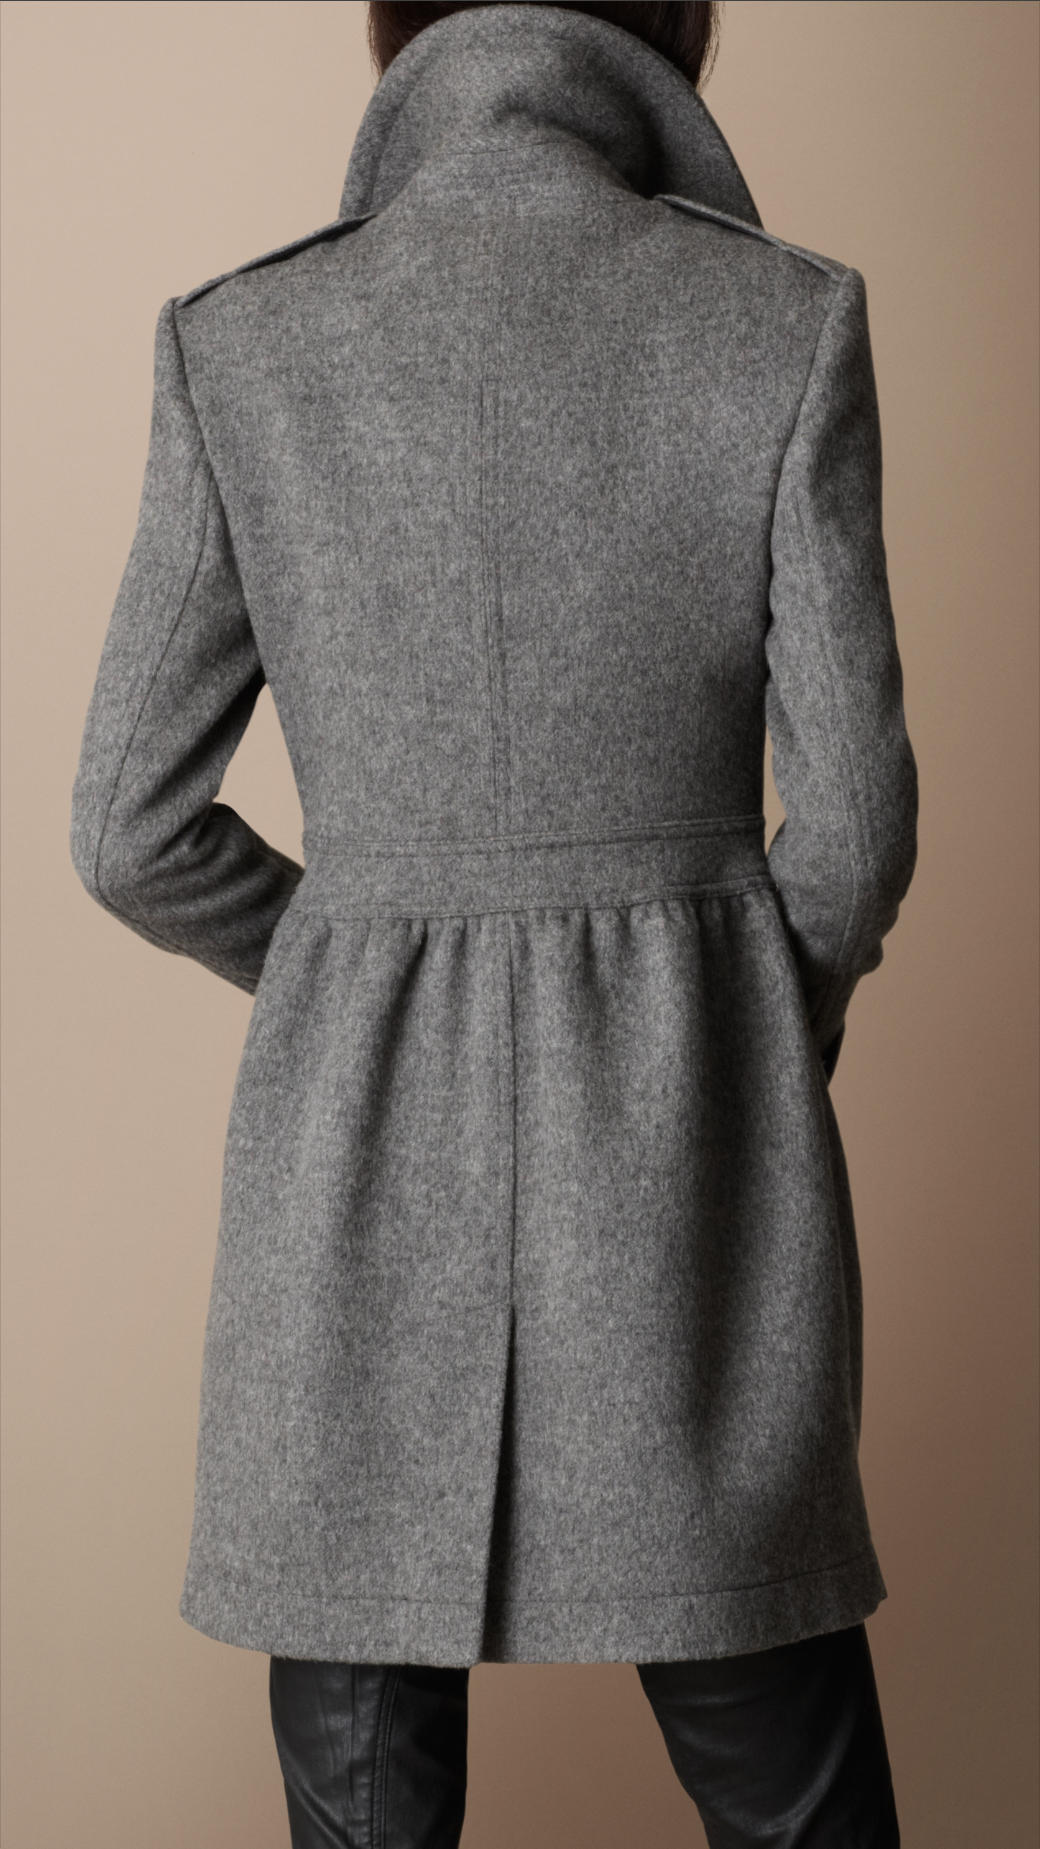 Lyst - Burberry Brit Toggle Detail Wool Coat in Gray